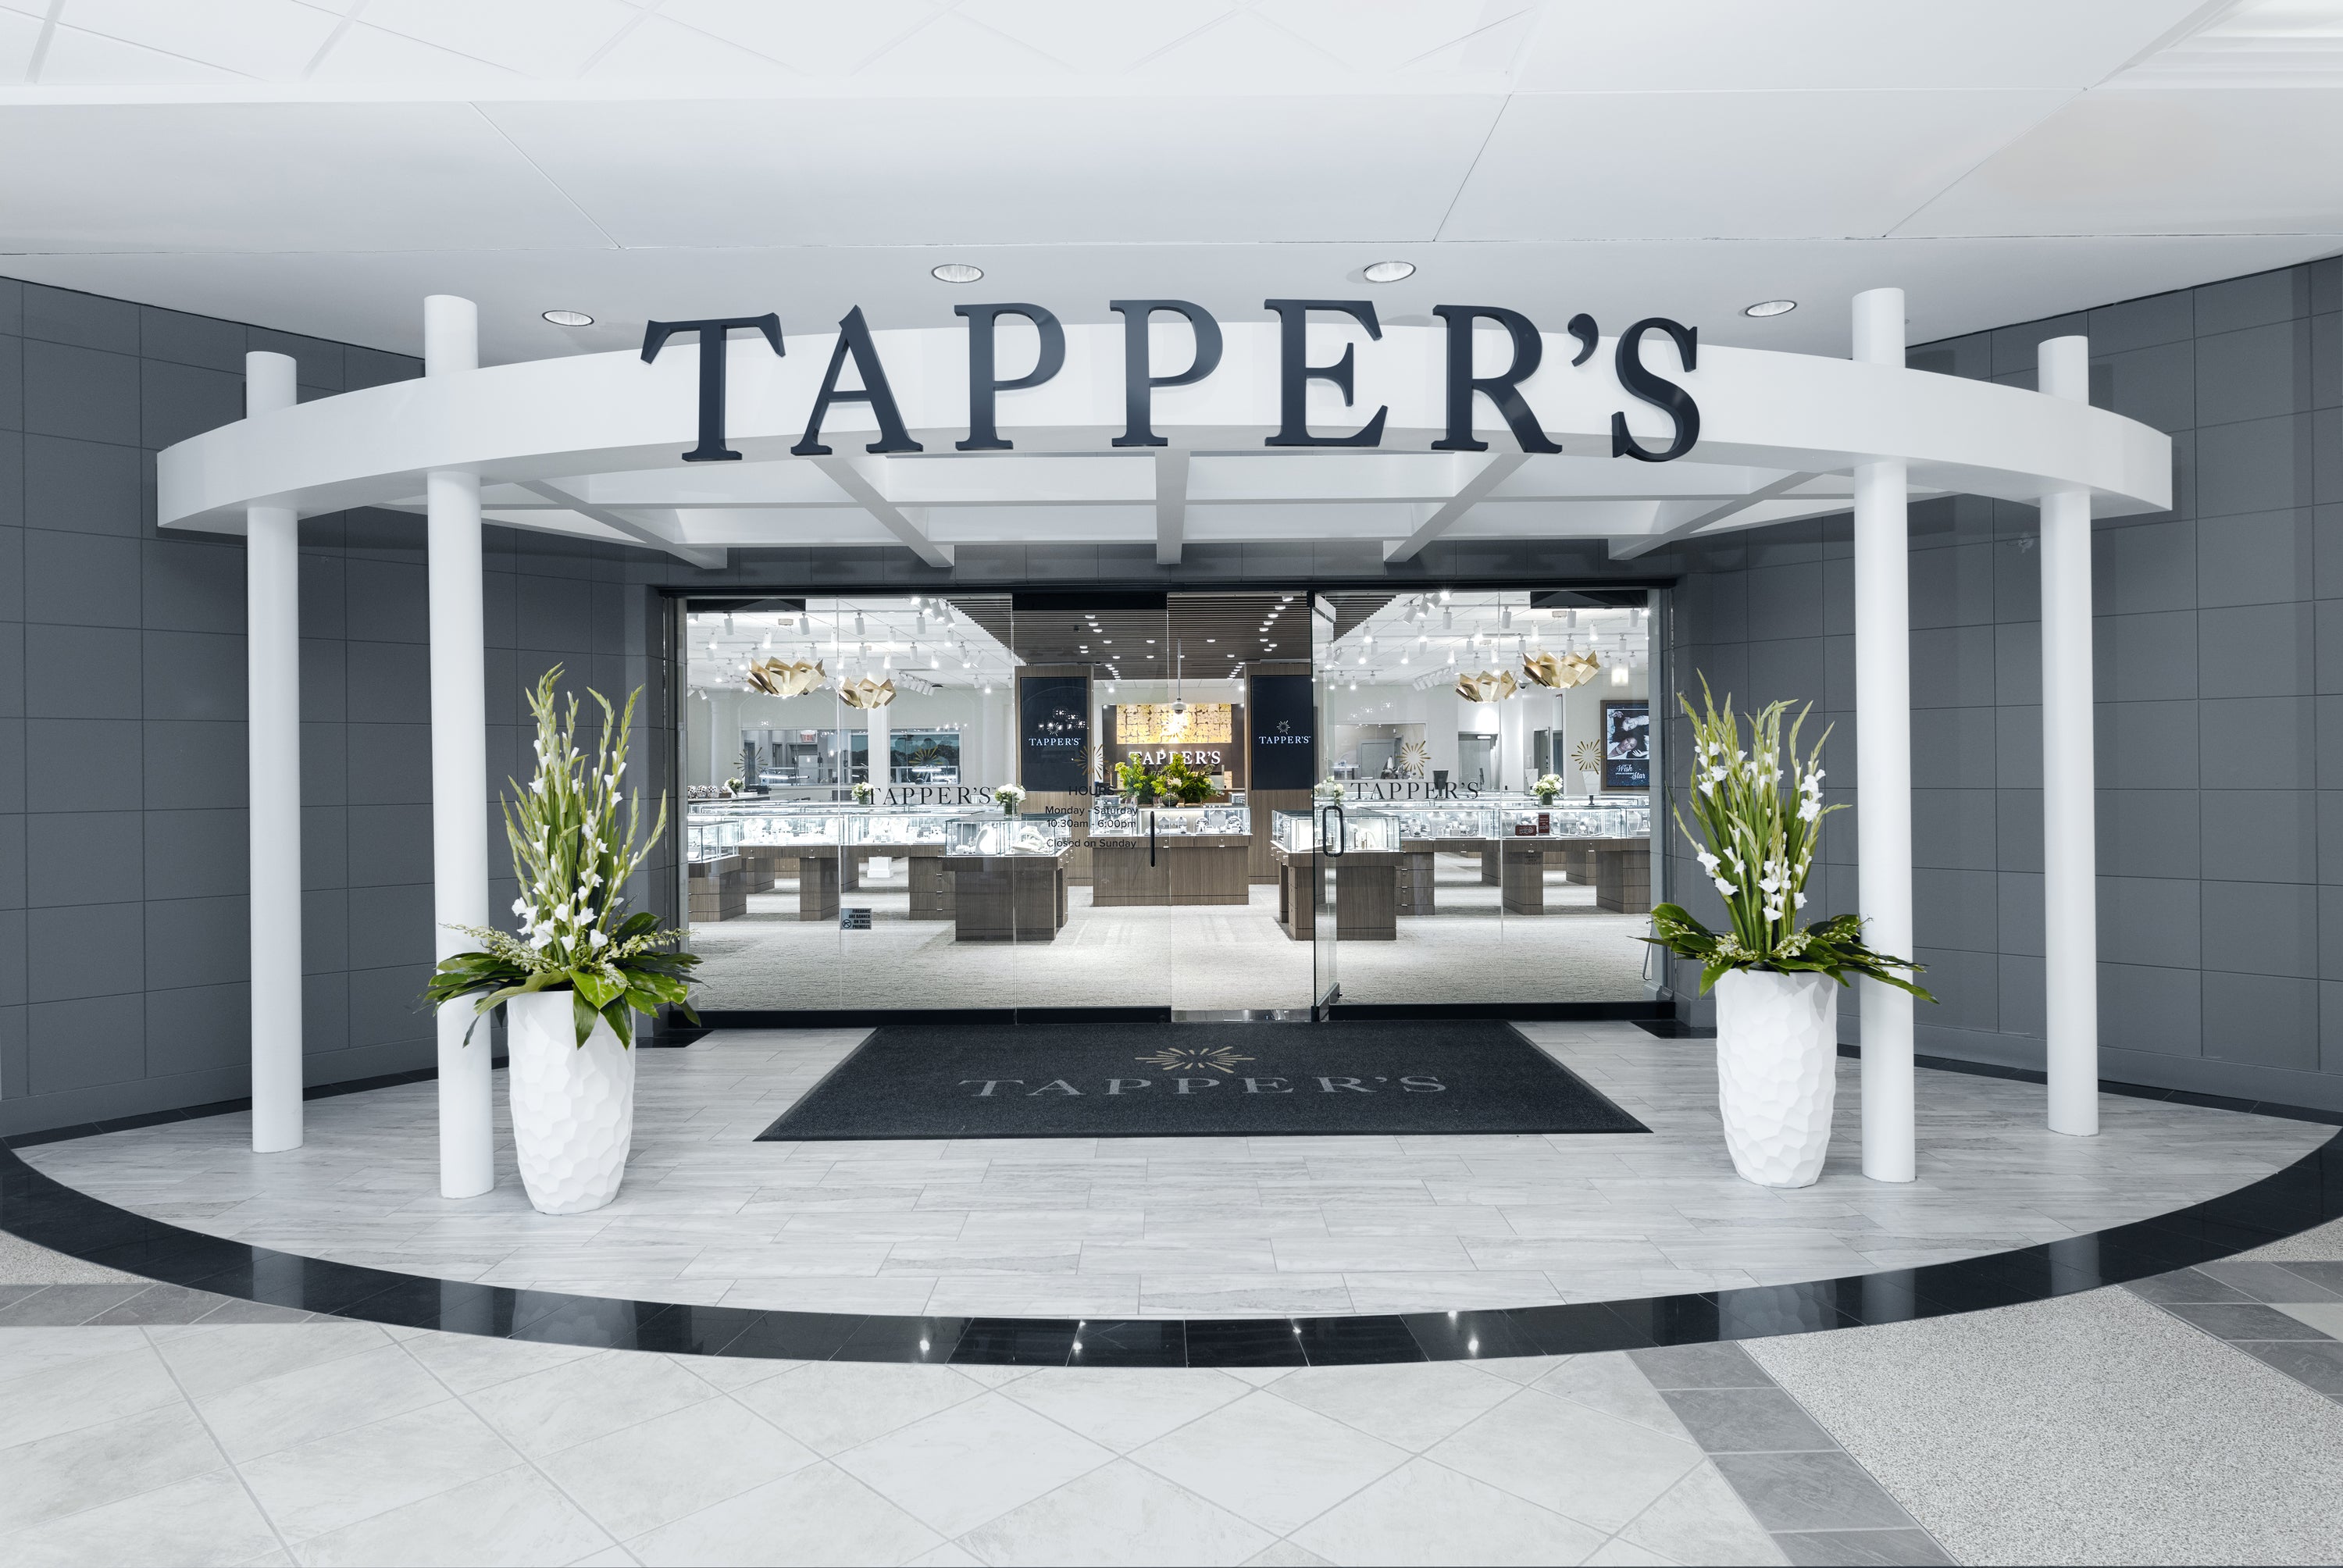 Tapper's location at the Orchard Lake Mall in West Bloomfield, Michigan